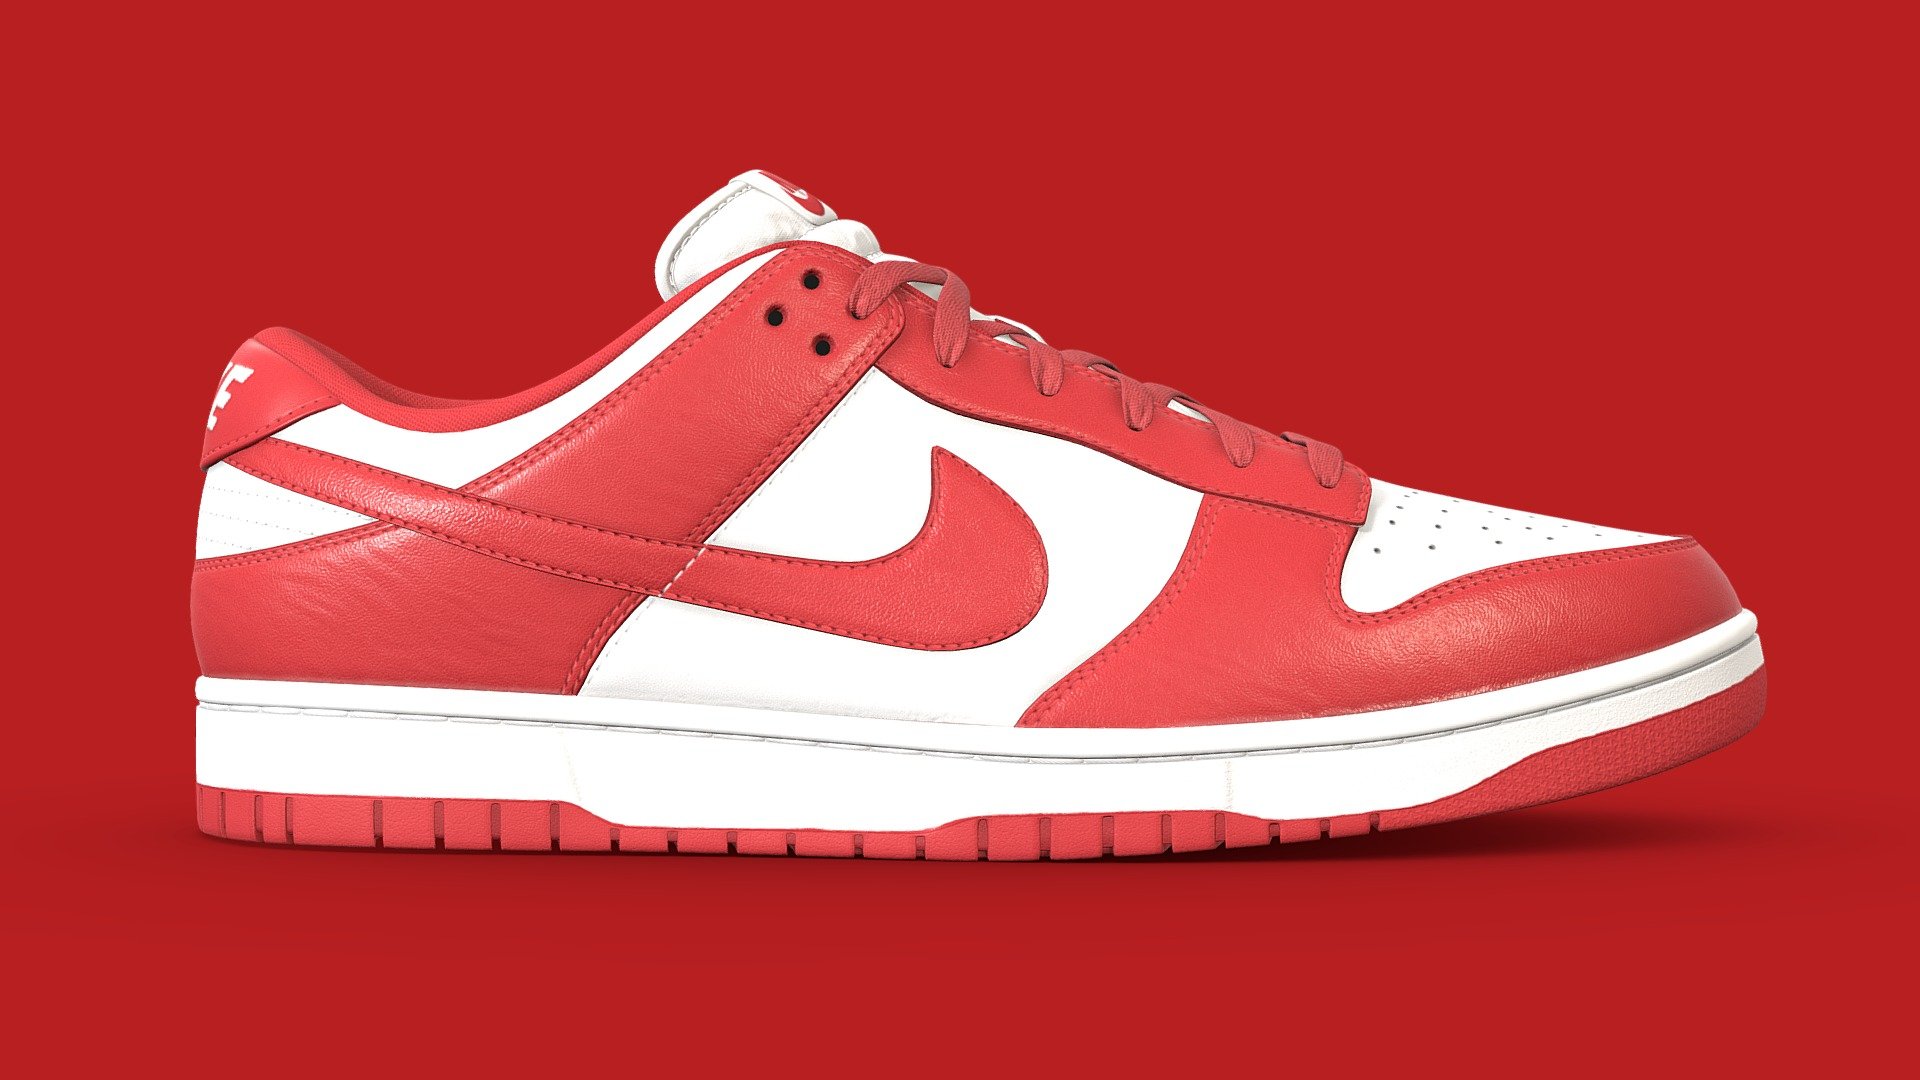 Nike Dunk Low in the University Red Colourway. Every detail was made in the recreation of this shoe, from the text on the medial side of the shoe to the subtlety of each material, nothing went overlooked. Stitches were sculpted by hand to achieve the highest quality

What's included




Blender file with linked textures

FBX and OBJ versions

OneMesh version

All 4k textures

Model Features

The upmost care went into crafting this model. As a result it is subdivision ready. The model was unwrapped with efficiency in mind. Both left and right shoes are mostly identical, save for logos and text that cannot be mirrored. As such the high detail version of the shoe uses 4 UV maps to cover both of the shoes, with the One mesh version using just the one UV map 3d model